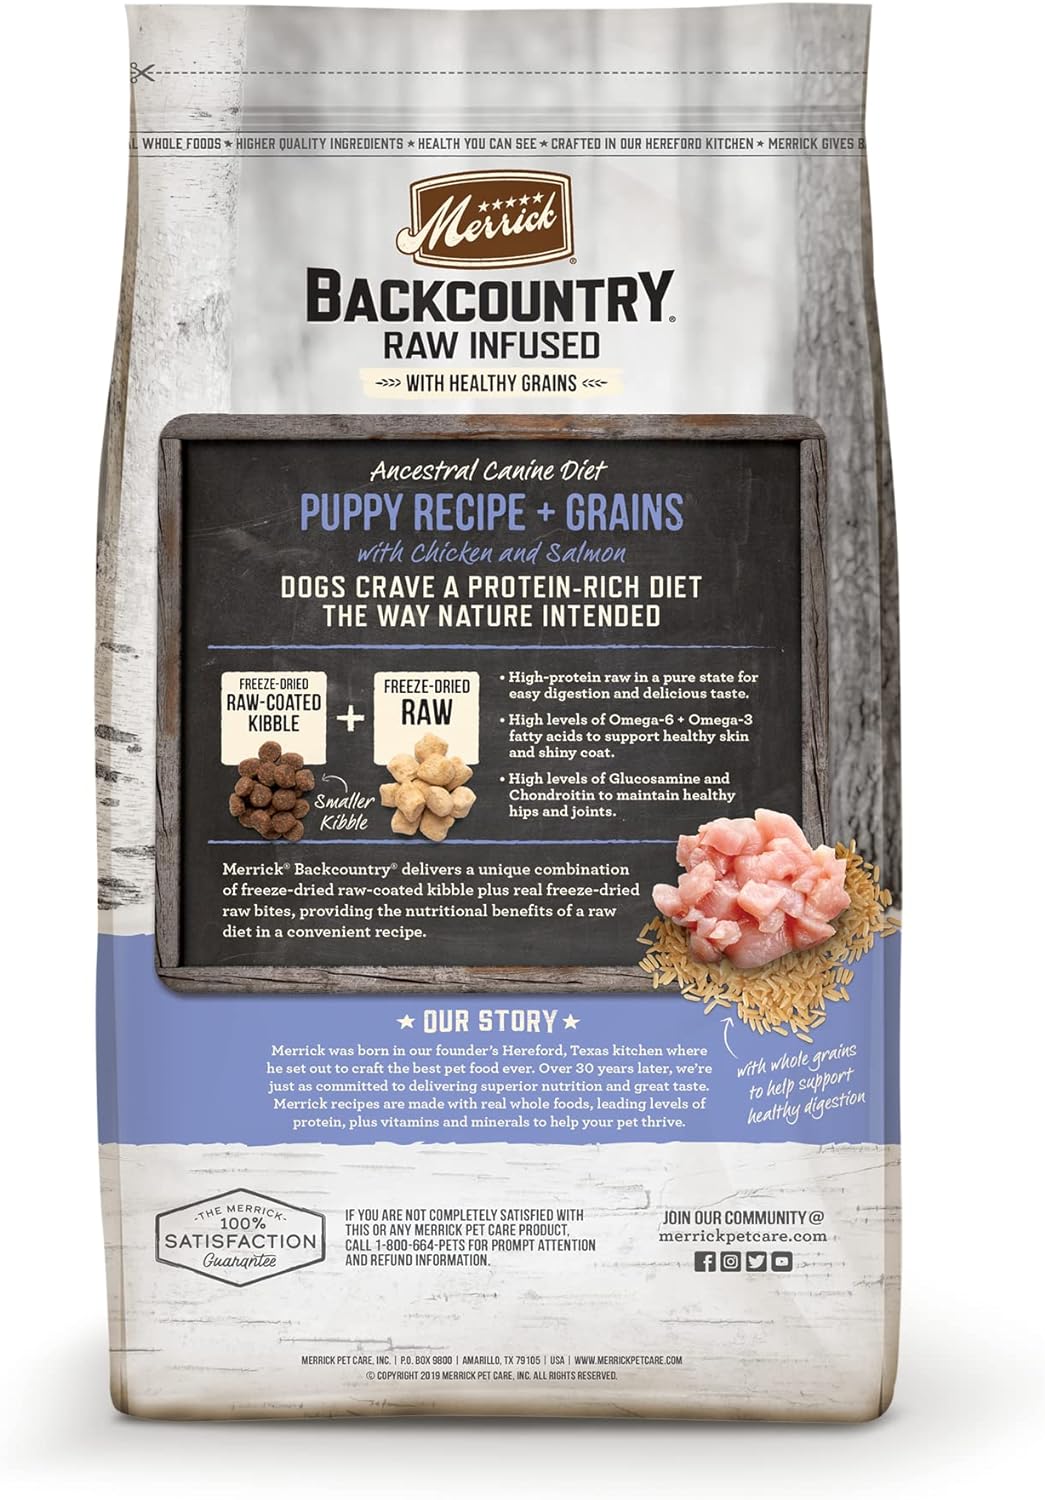 Merrick Backcountry Raw Infused Puppy Recipe + Grains Dry Dog Food – Gallery Image 9